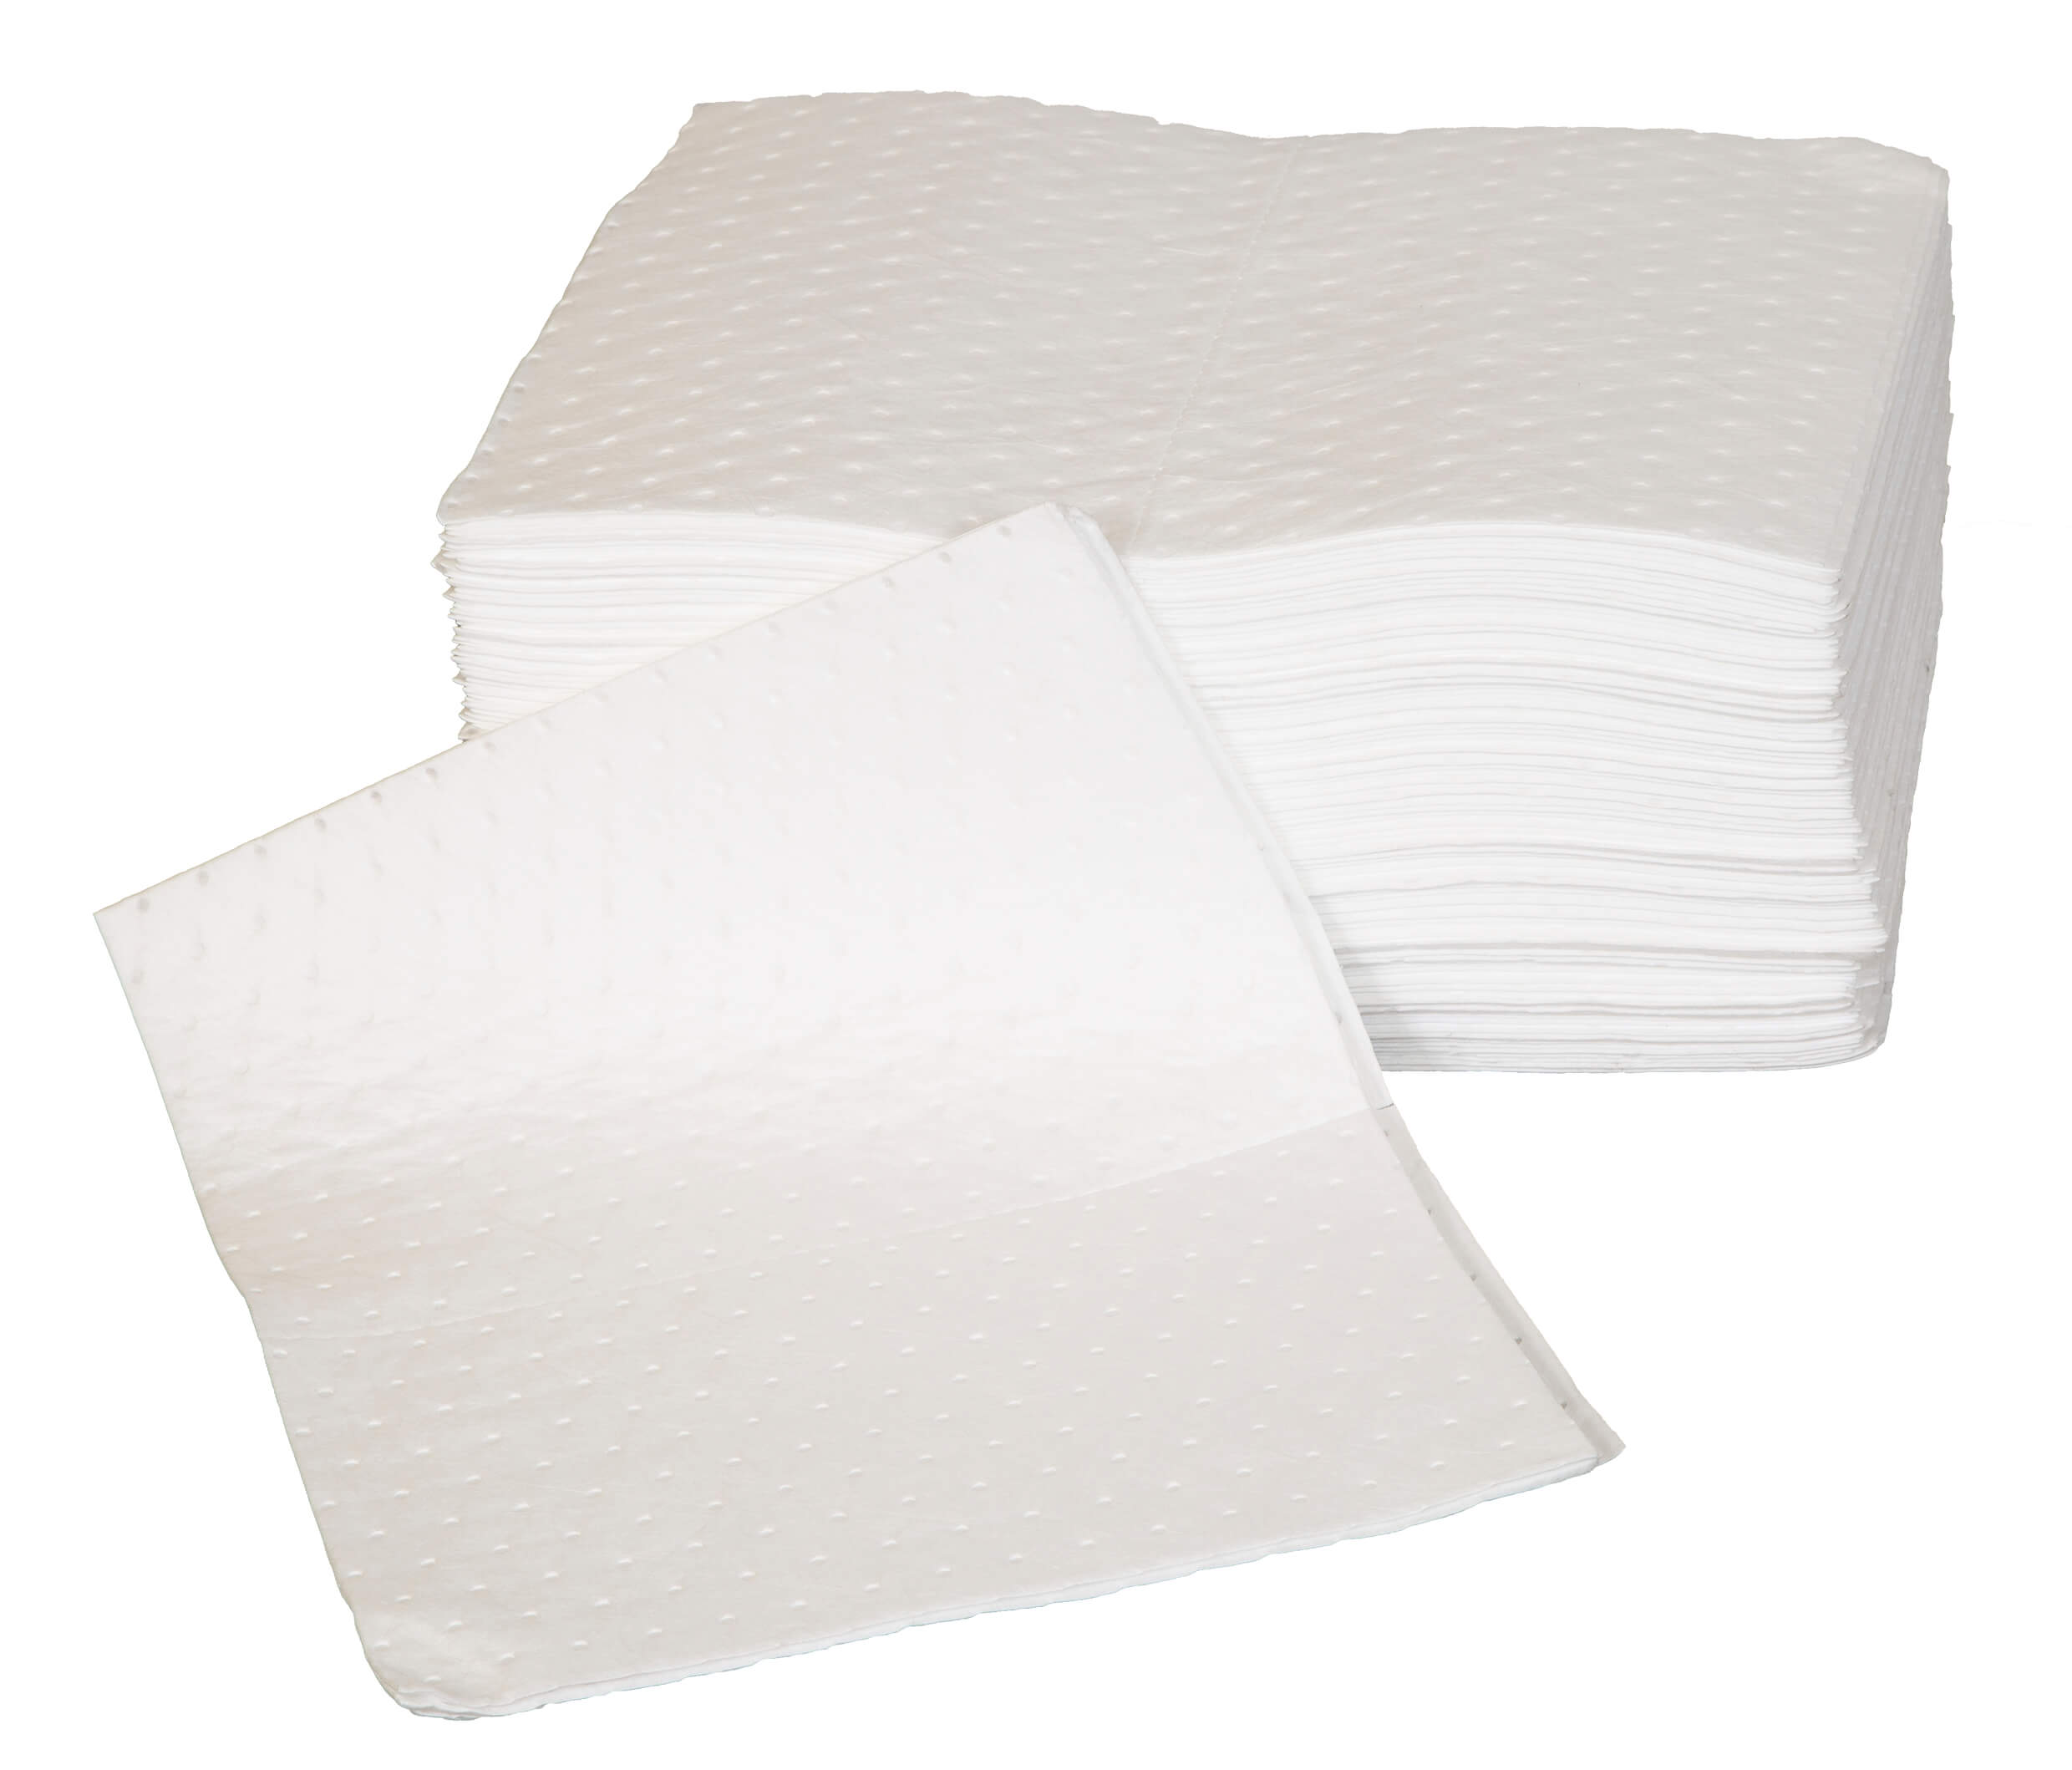 Double Weight Oil & Fuel Absorbent Pads - Polywrapped Pack of 100